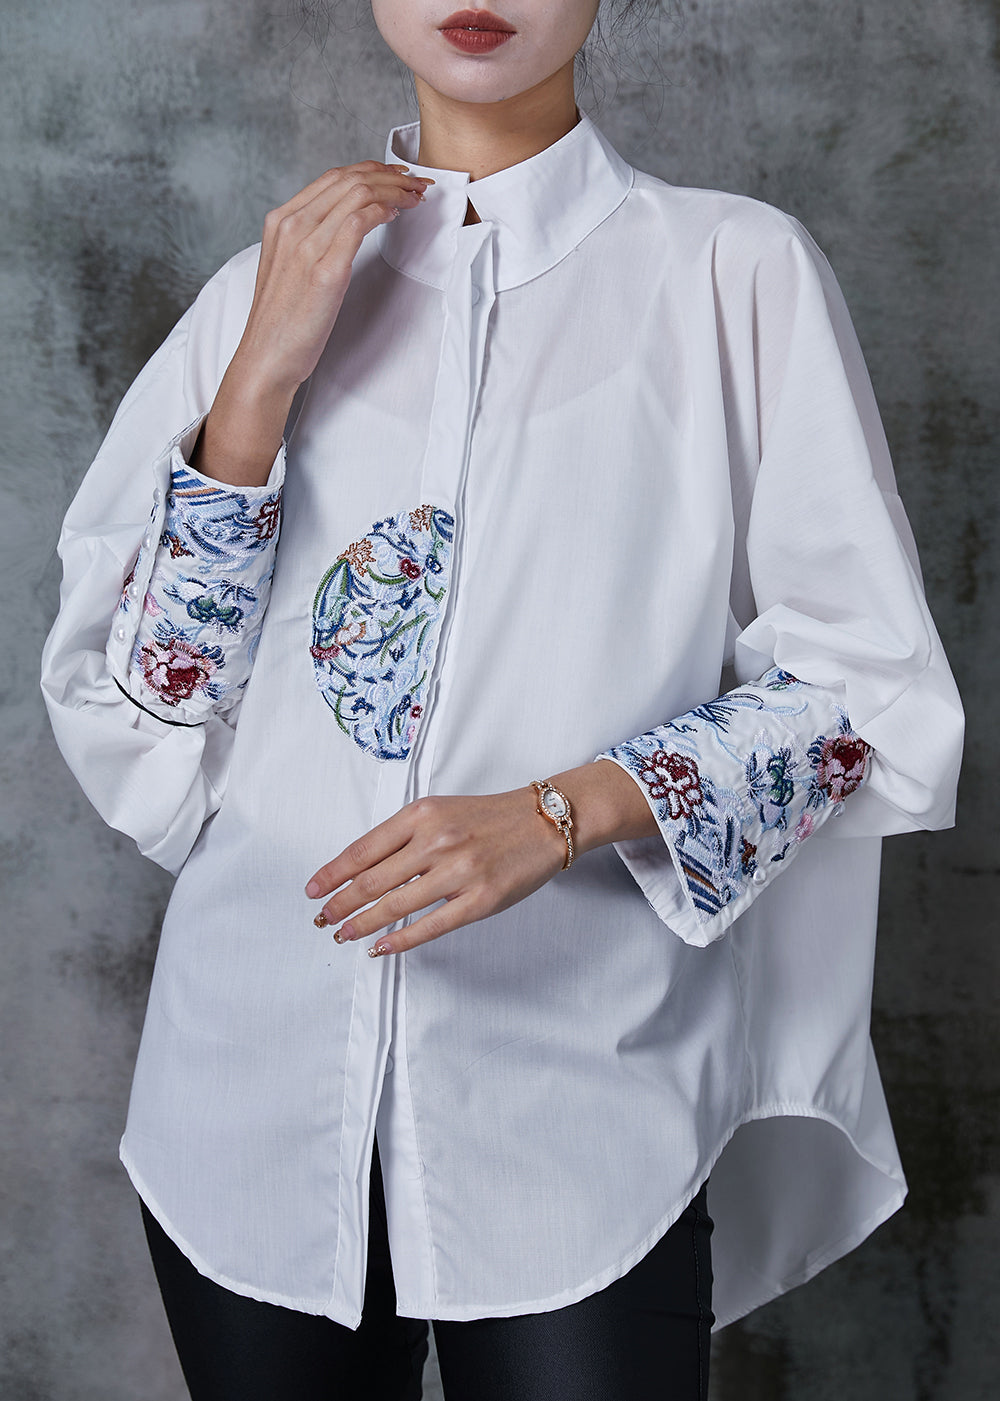 Plus Size White Embroidered Cotton Shirt Tops Summer